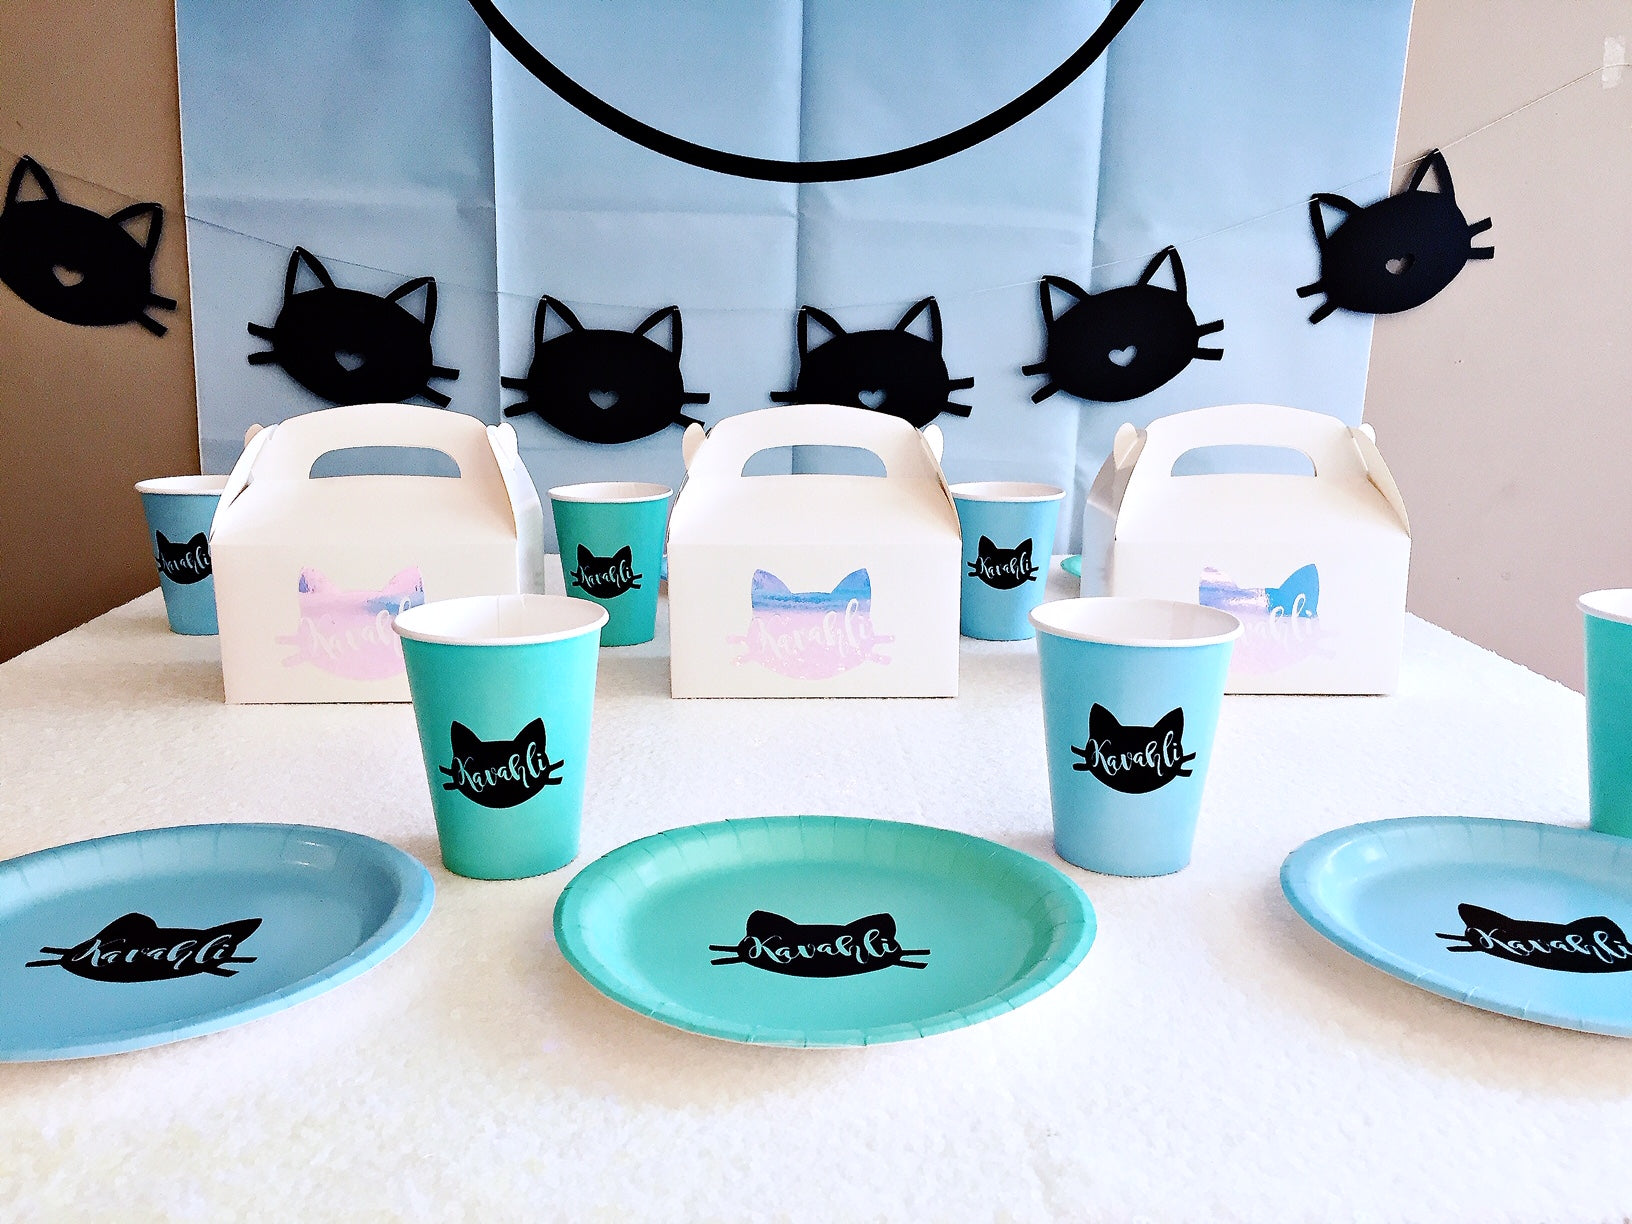 Kitty cat party theme